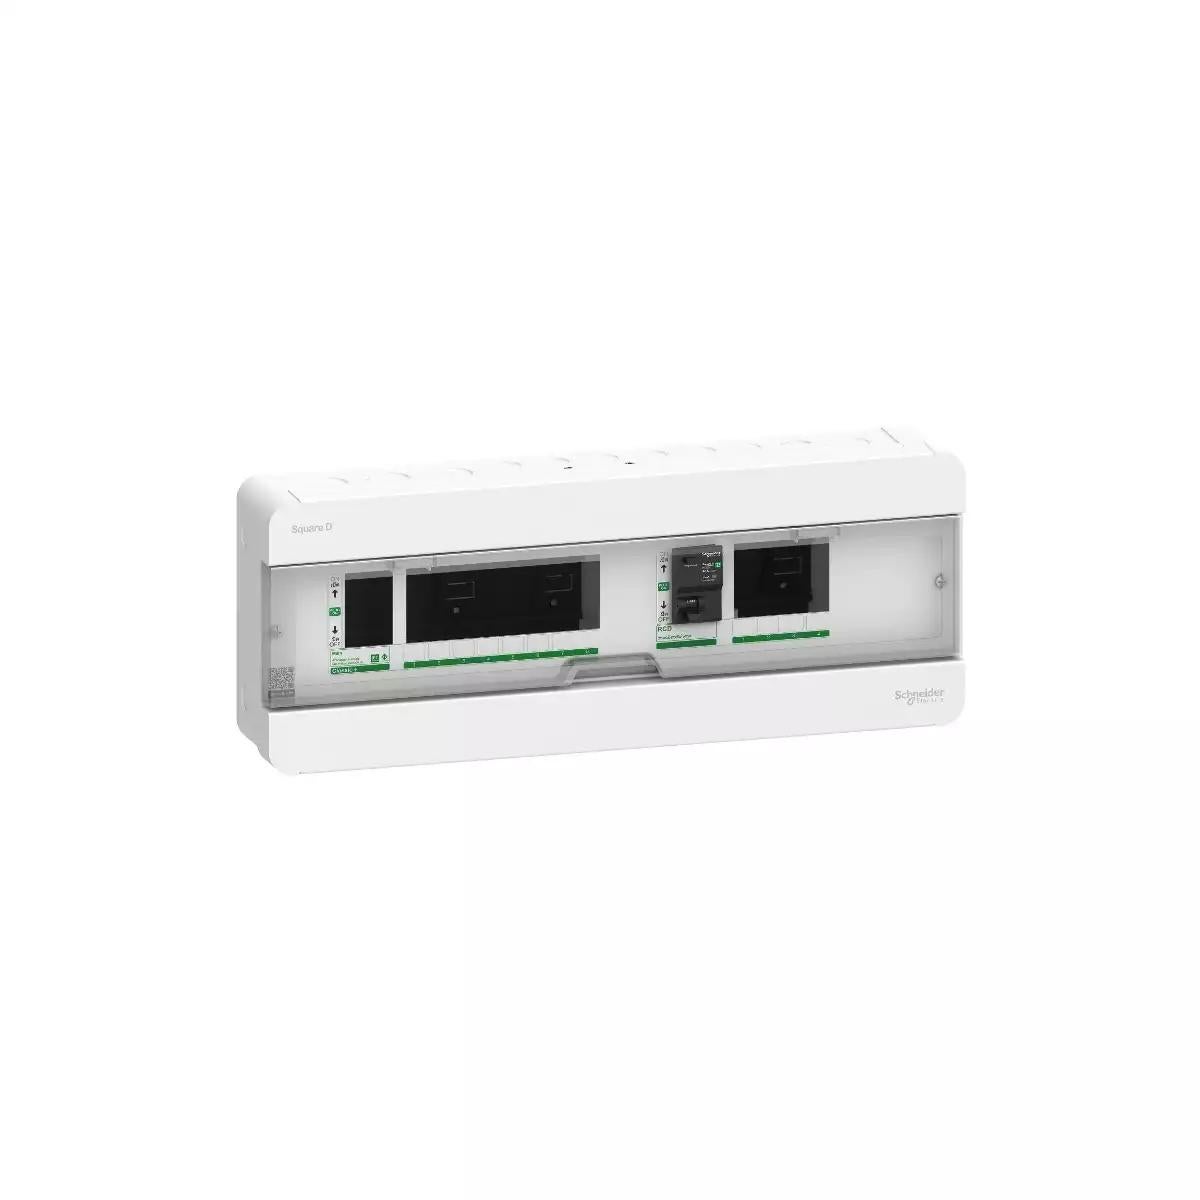 Square D Classic+ Split consumer unit - Surface mounted - 8+4 ways RCCB 40A